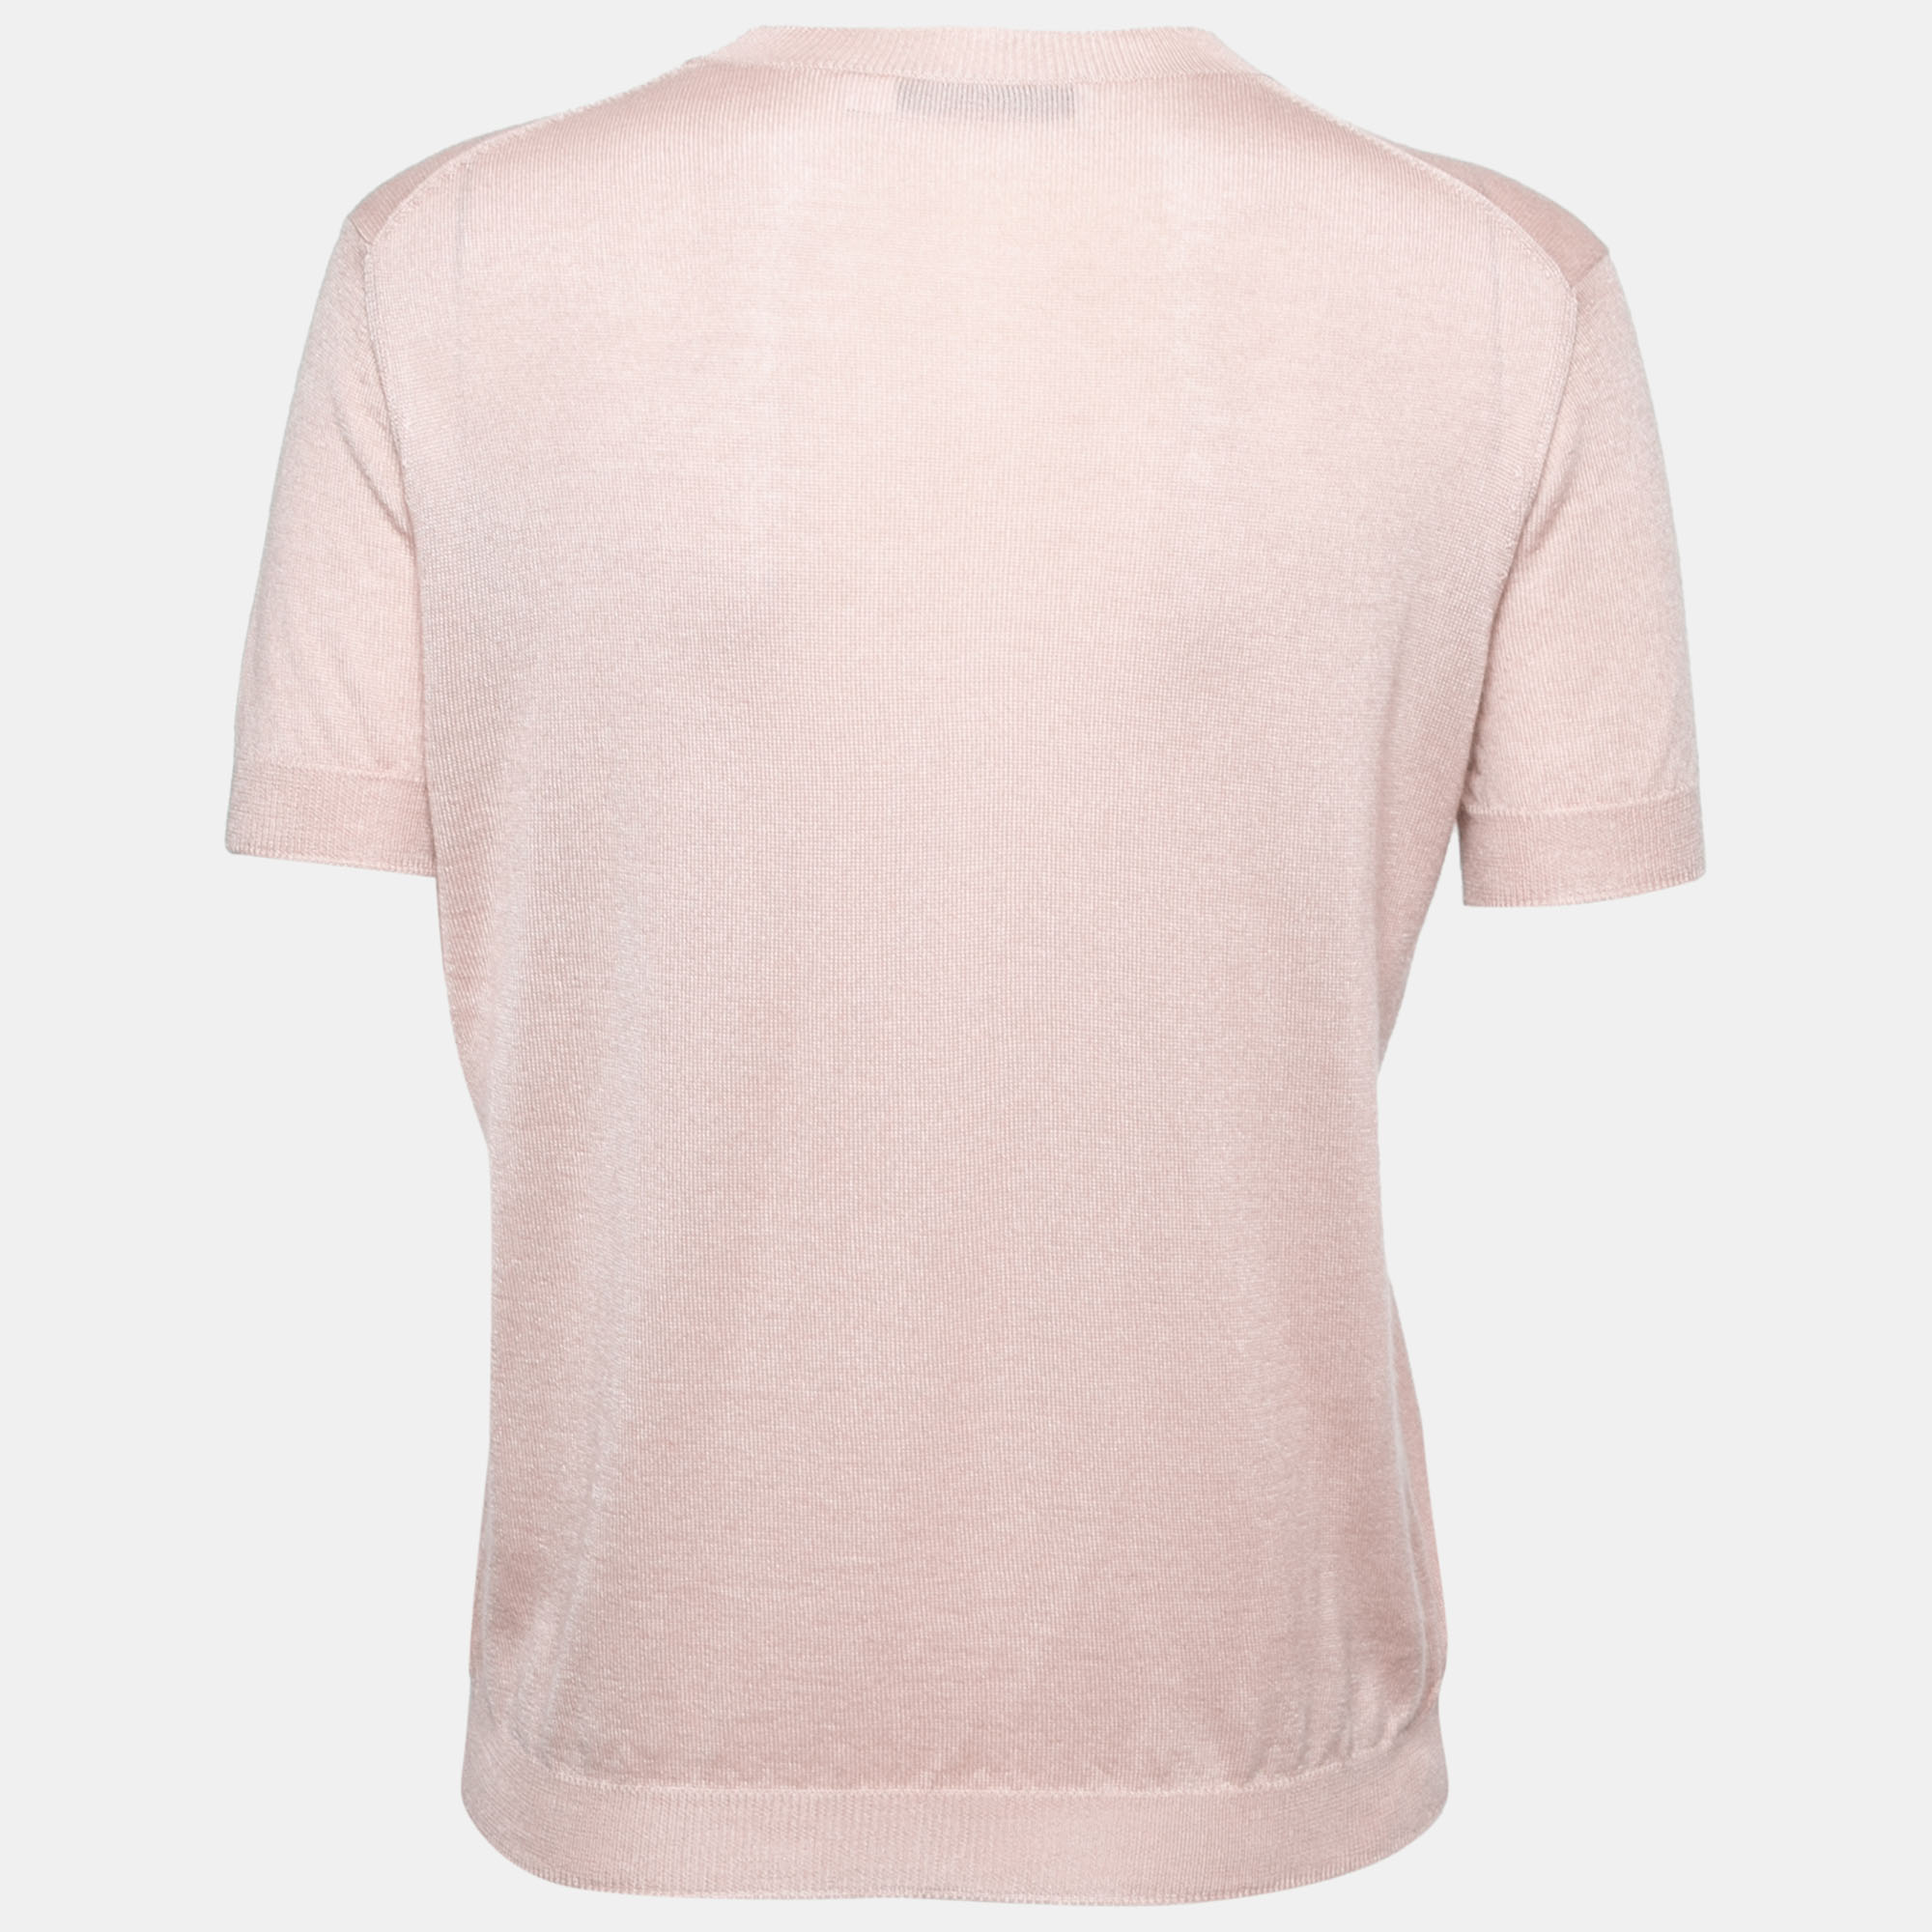 

Dior Nude Pink Cashmere Knit Embroidered Detail Short Sleeve Top